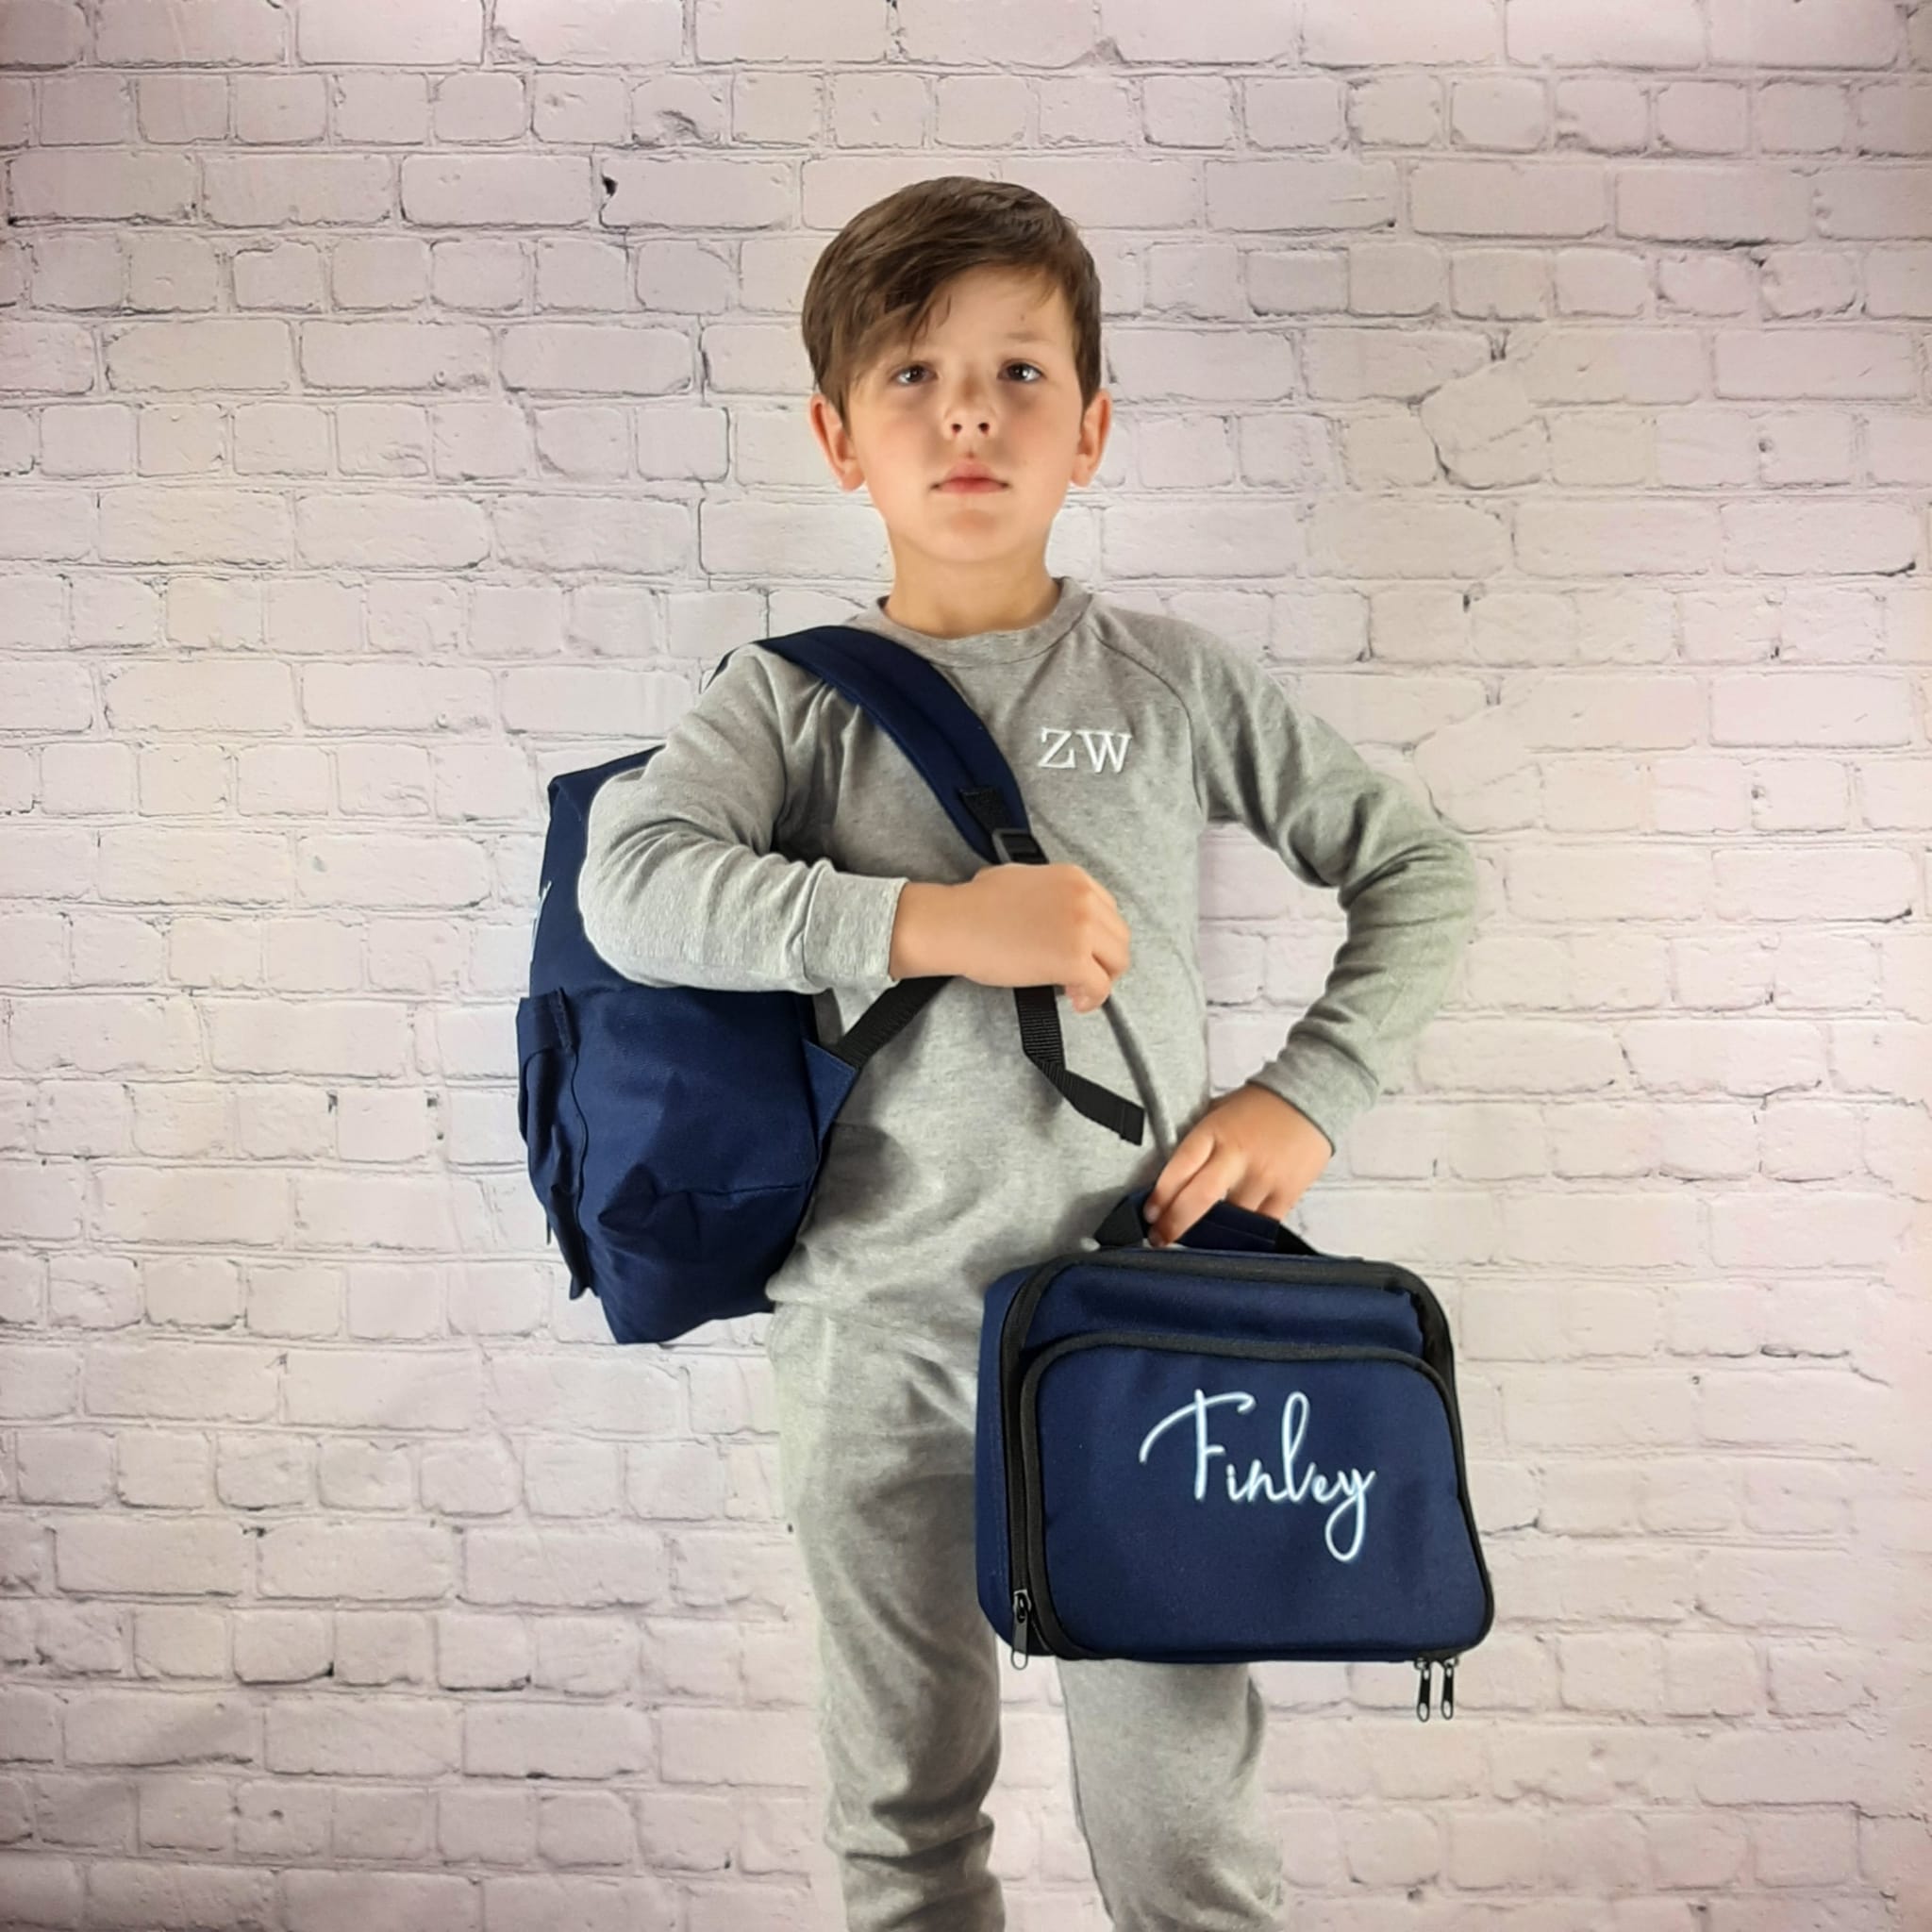 3 piece back to school bag set featuring gym bag school backpack rucksack and cooler lunch bag with embroidered personalised name